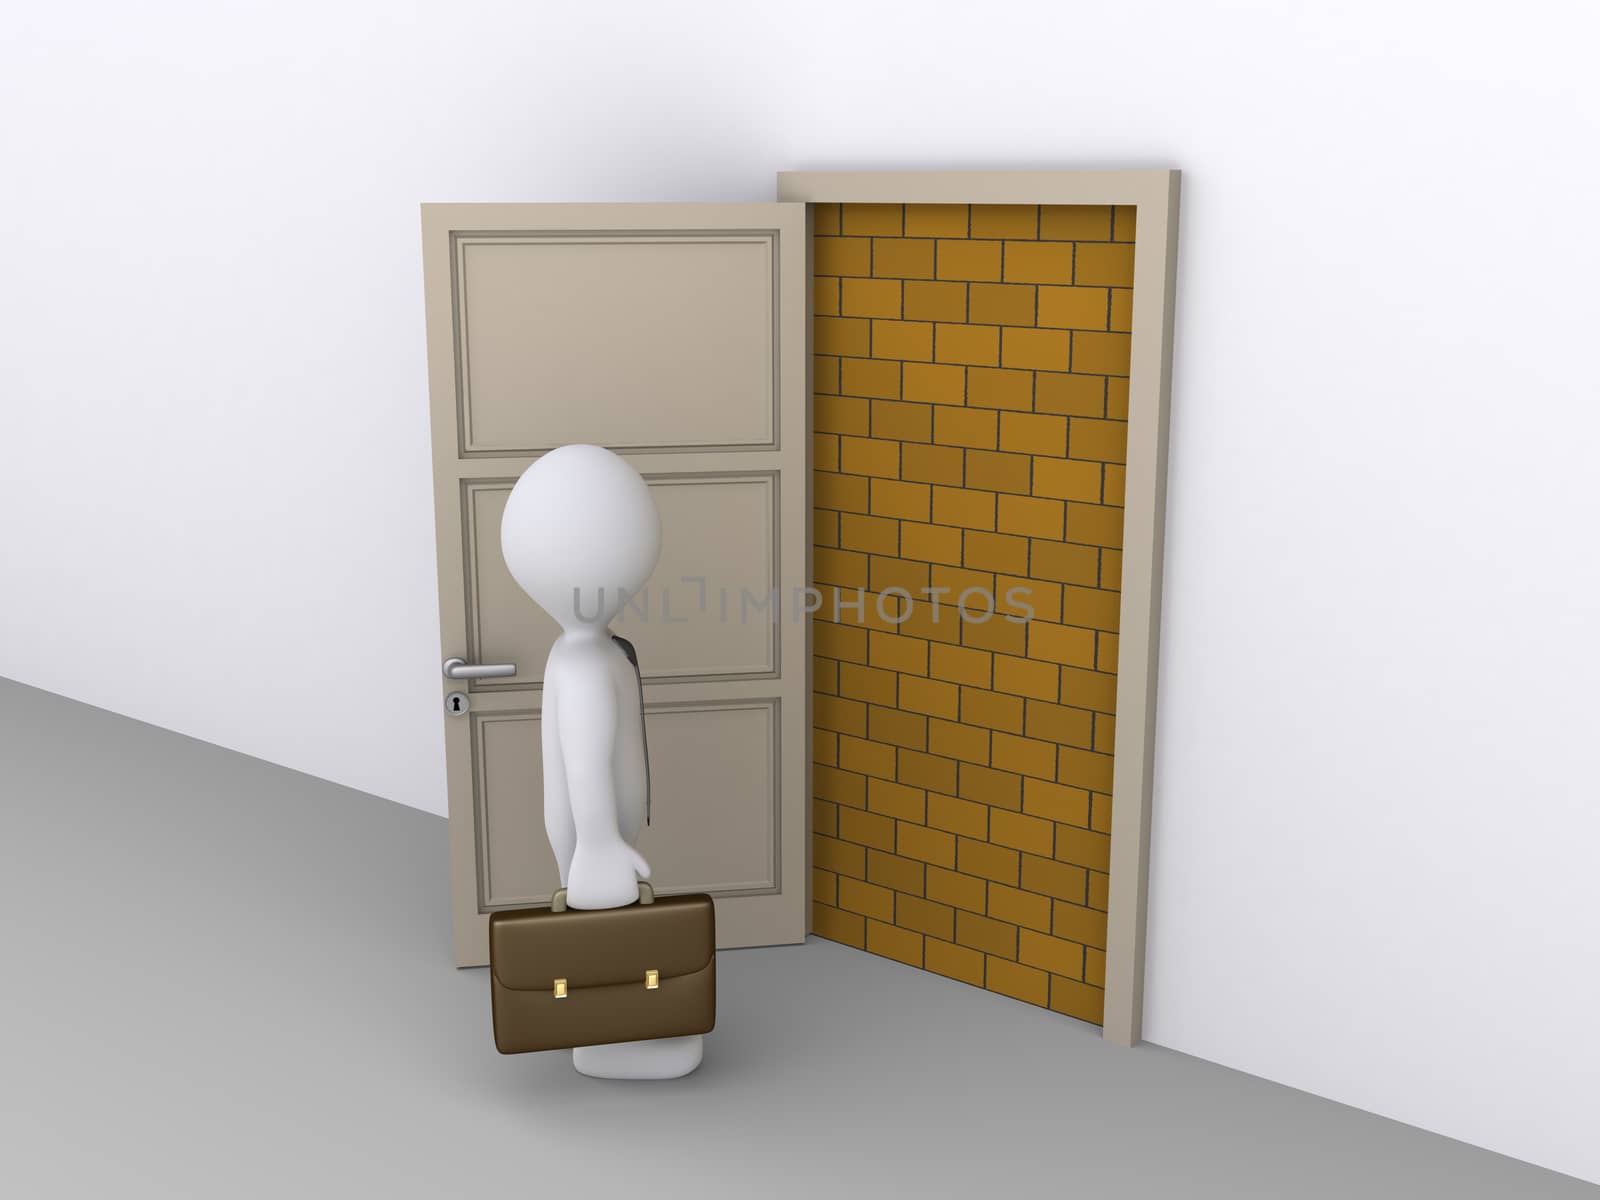 Blocked doorway and a businessman by 6kor3dos